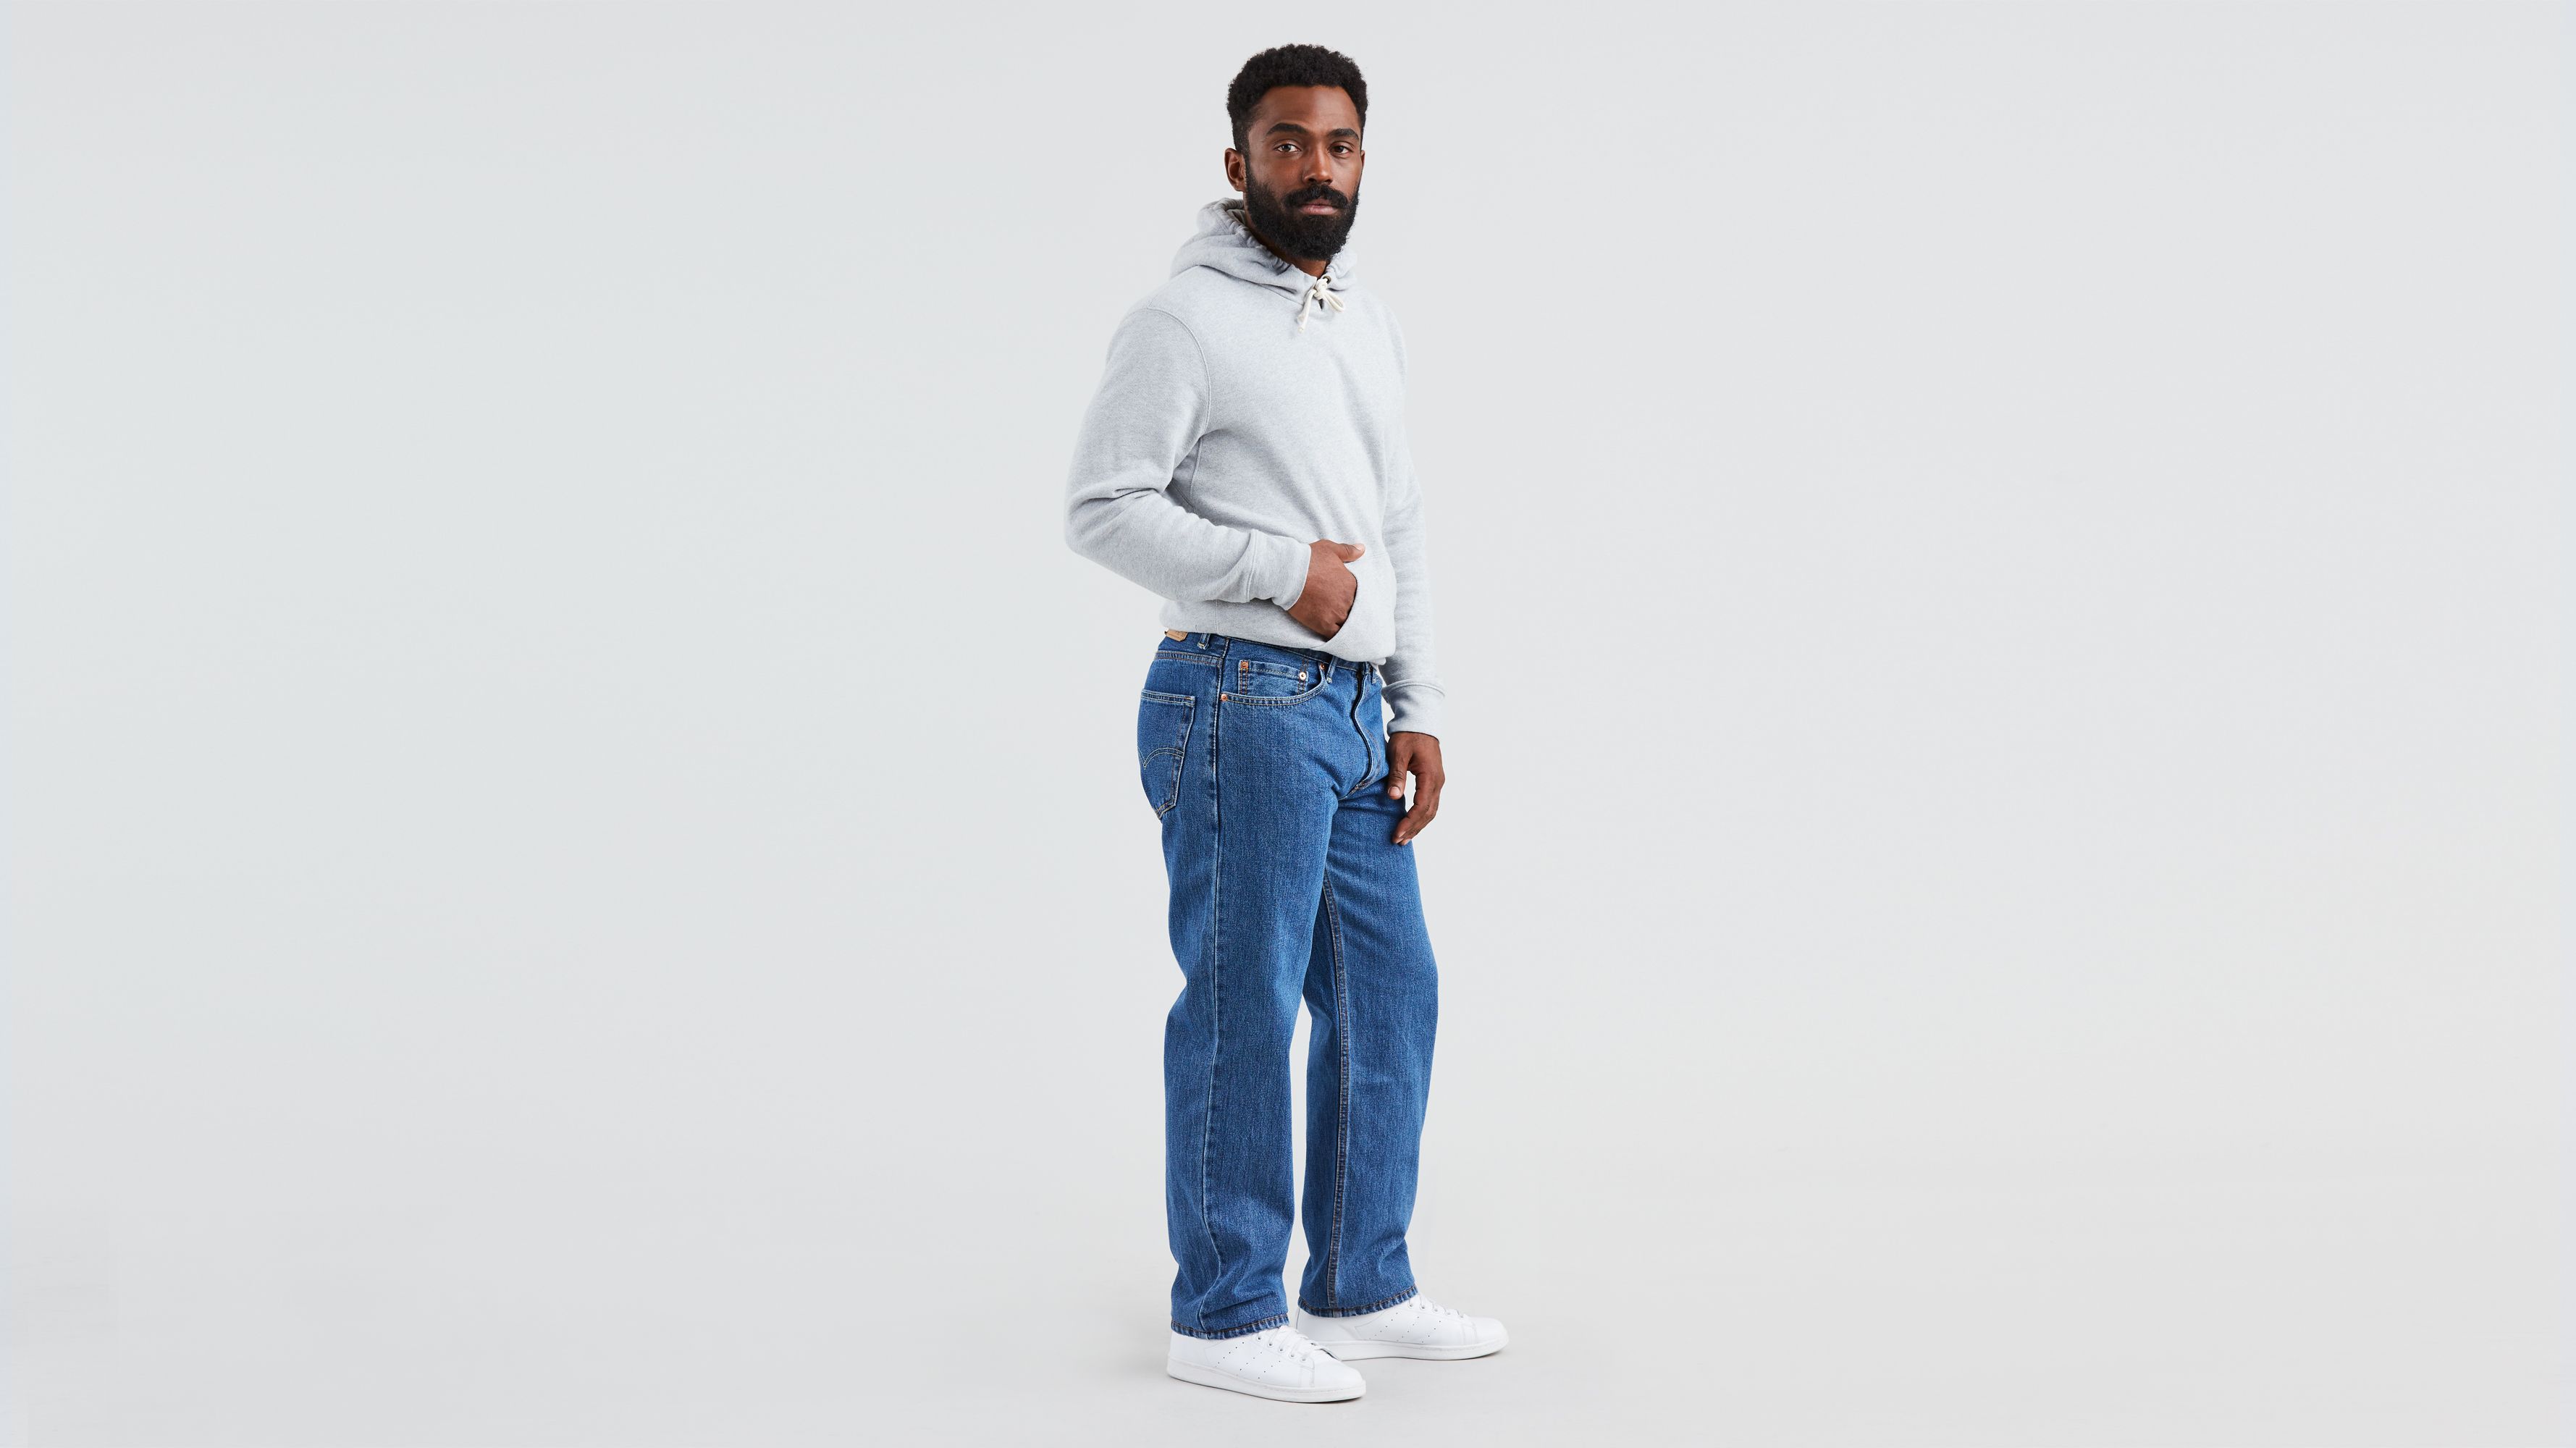 levi's big and tall mens jeans